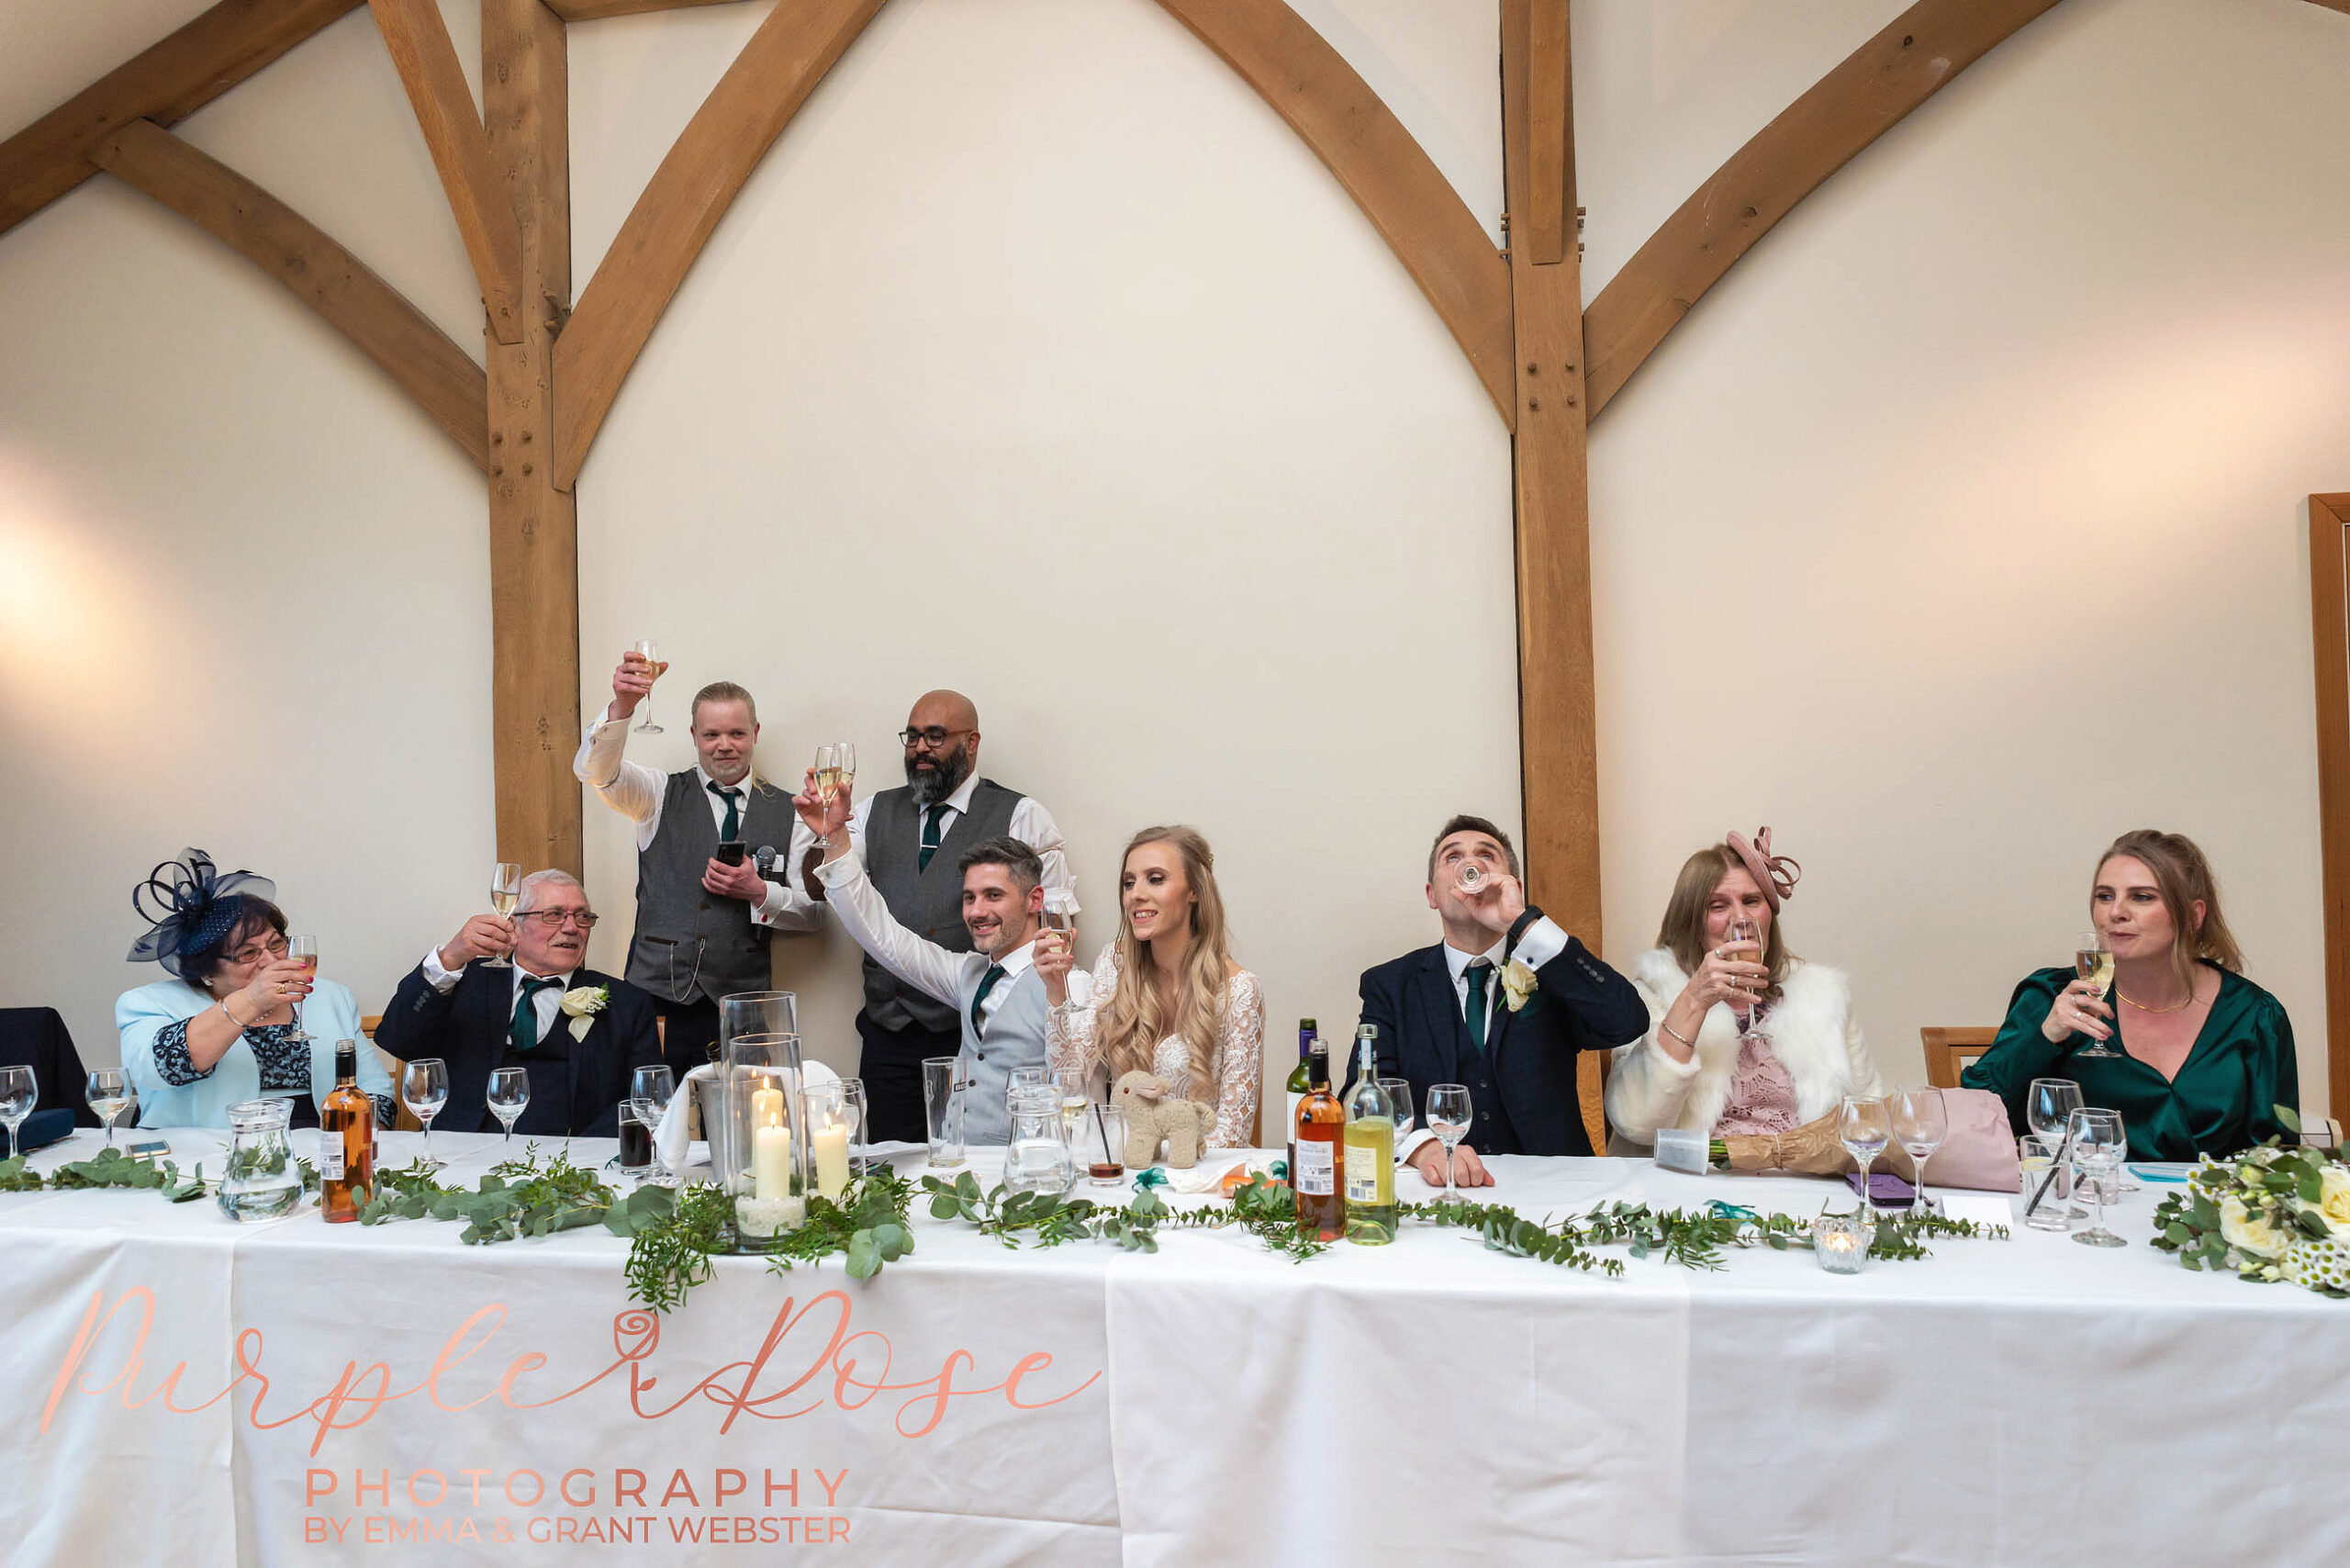 Photo of drinks being raised during the speeches at a wedding in MIlton Keynes